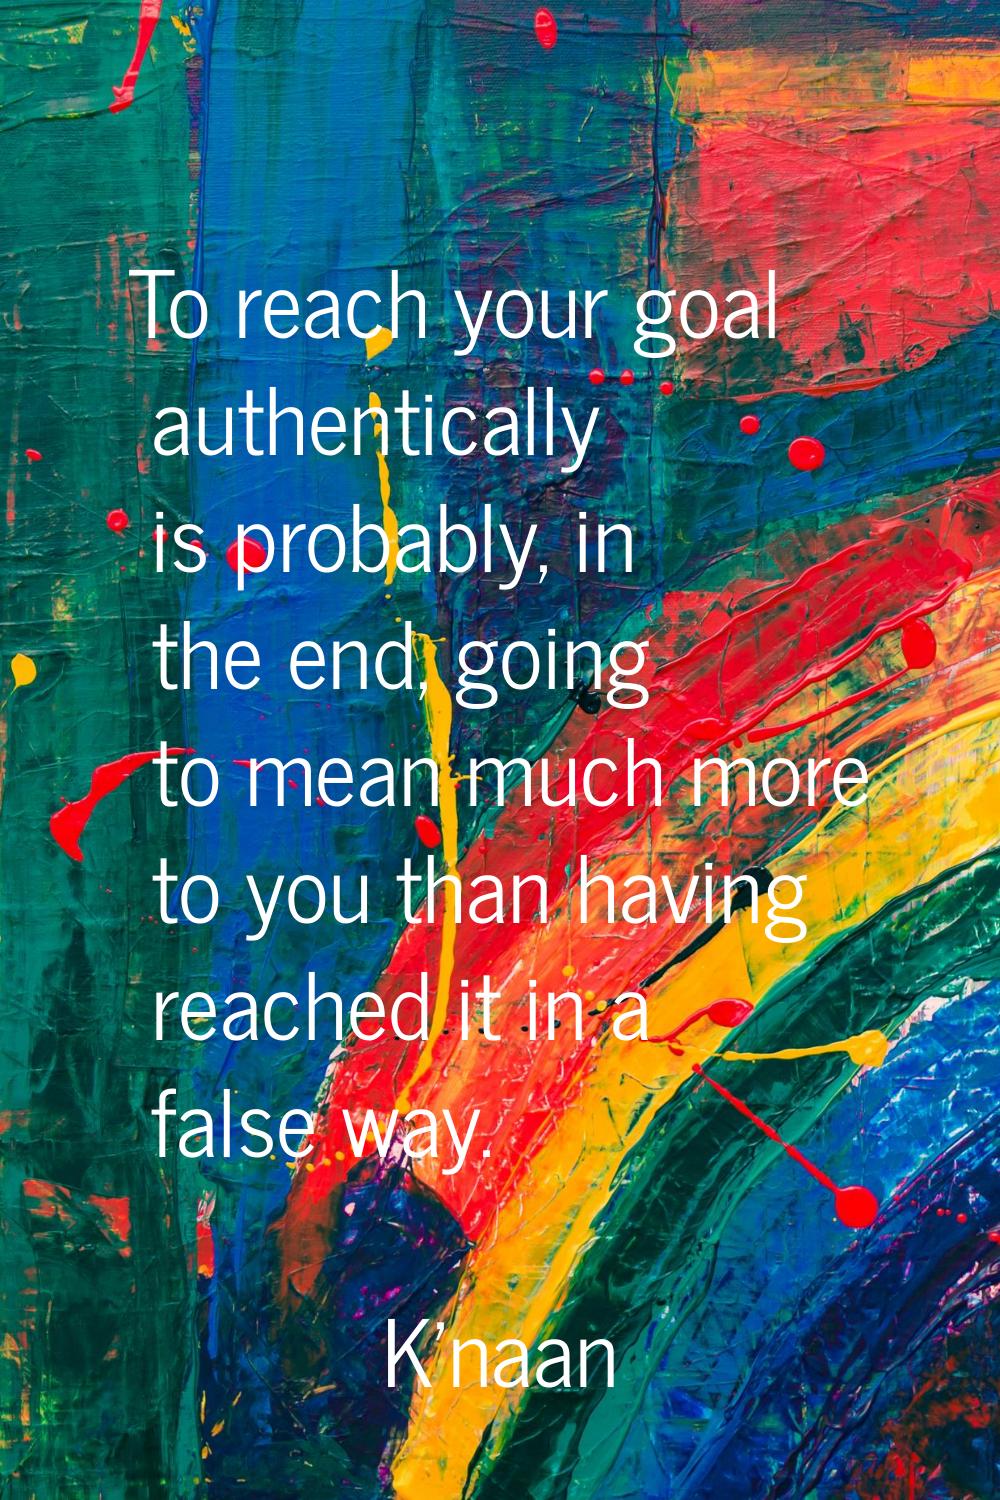 To reach your goal authentically is probably, in the end, going to mean much more to you than havin